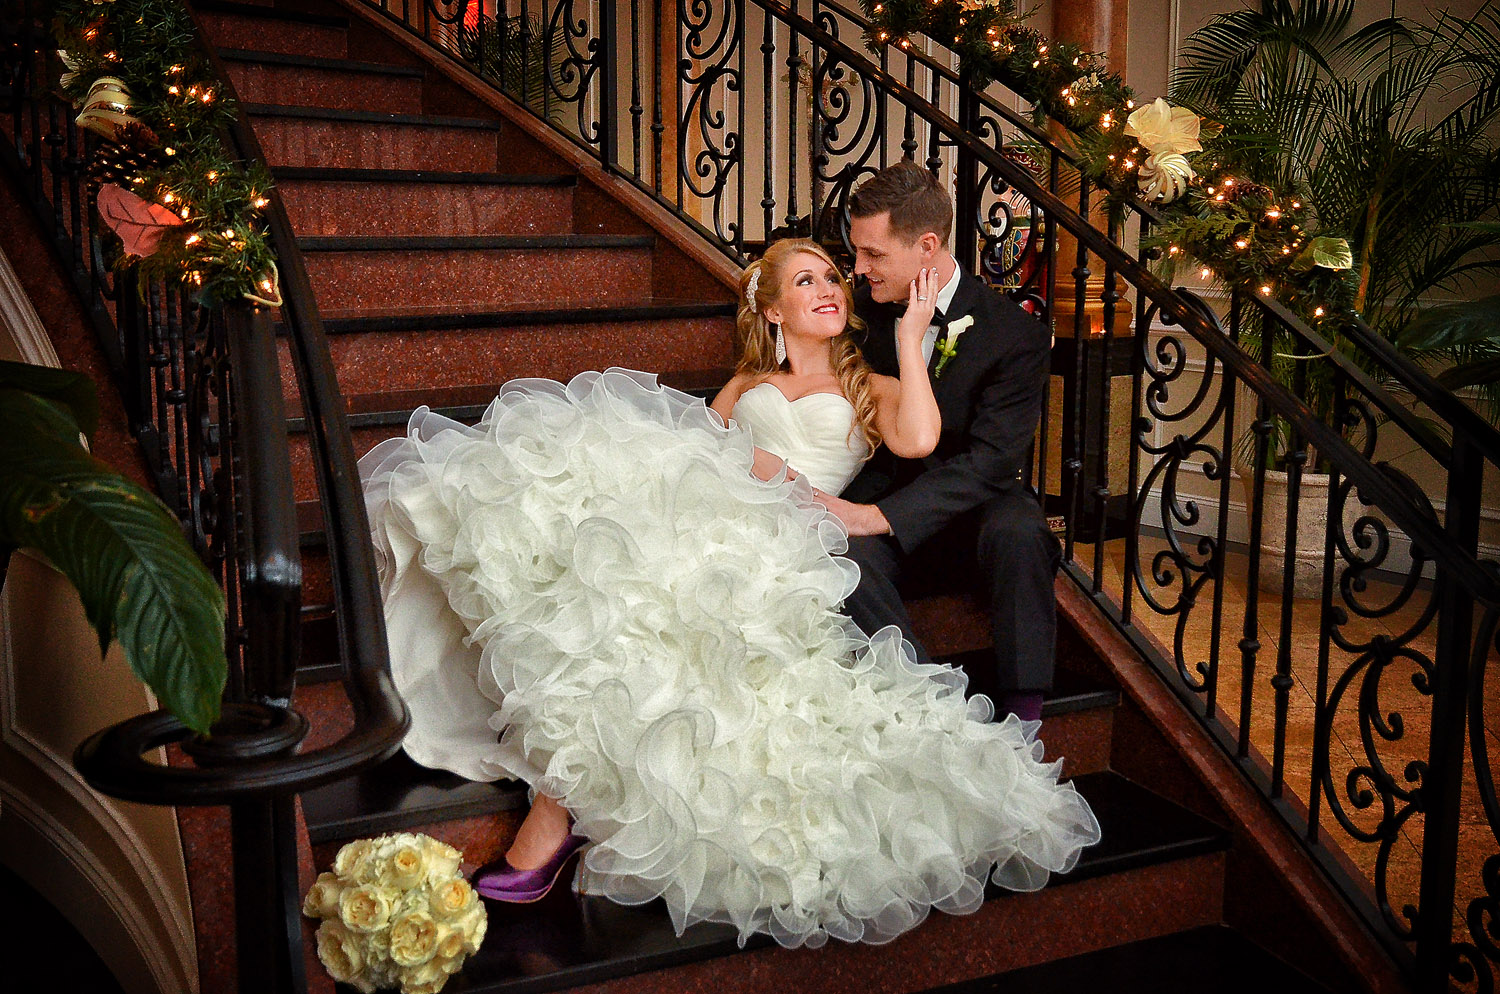 The Merion / Meyer Photography